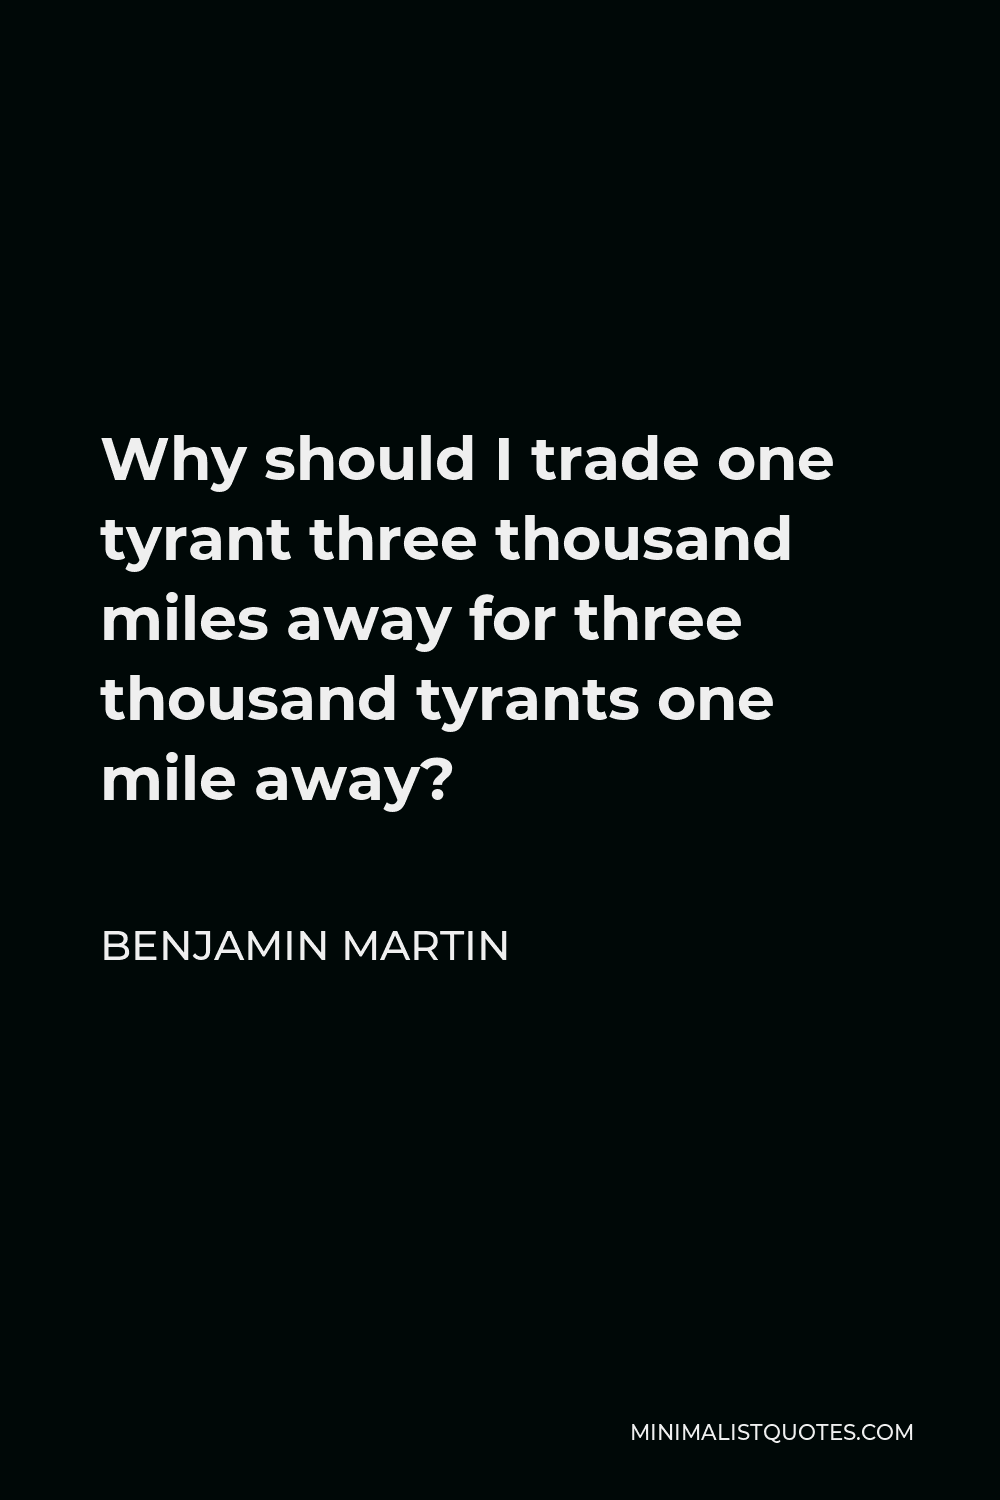 Benjamin Martin Quote - Why should I trade one tyrant three thousand miles away for three thousand tyrants one mile away?